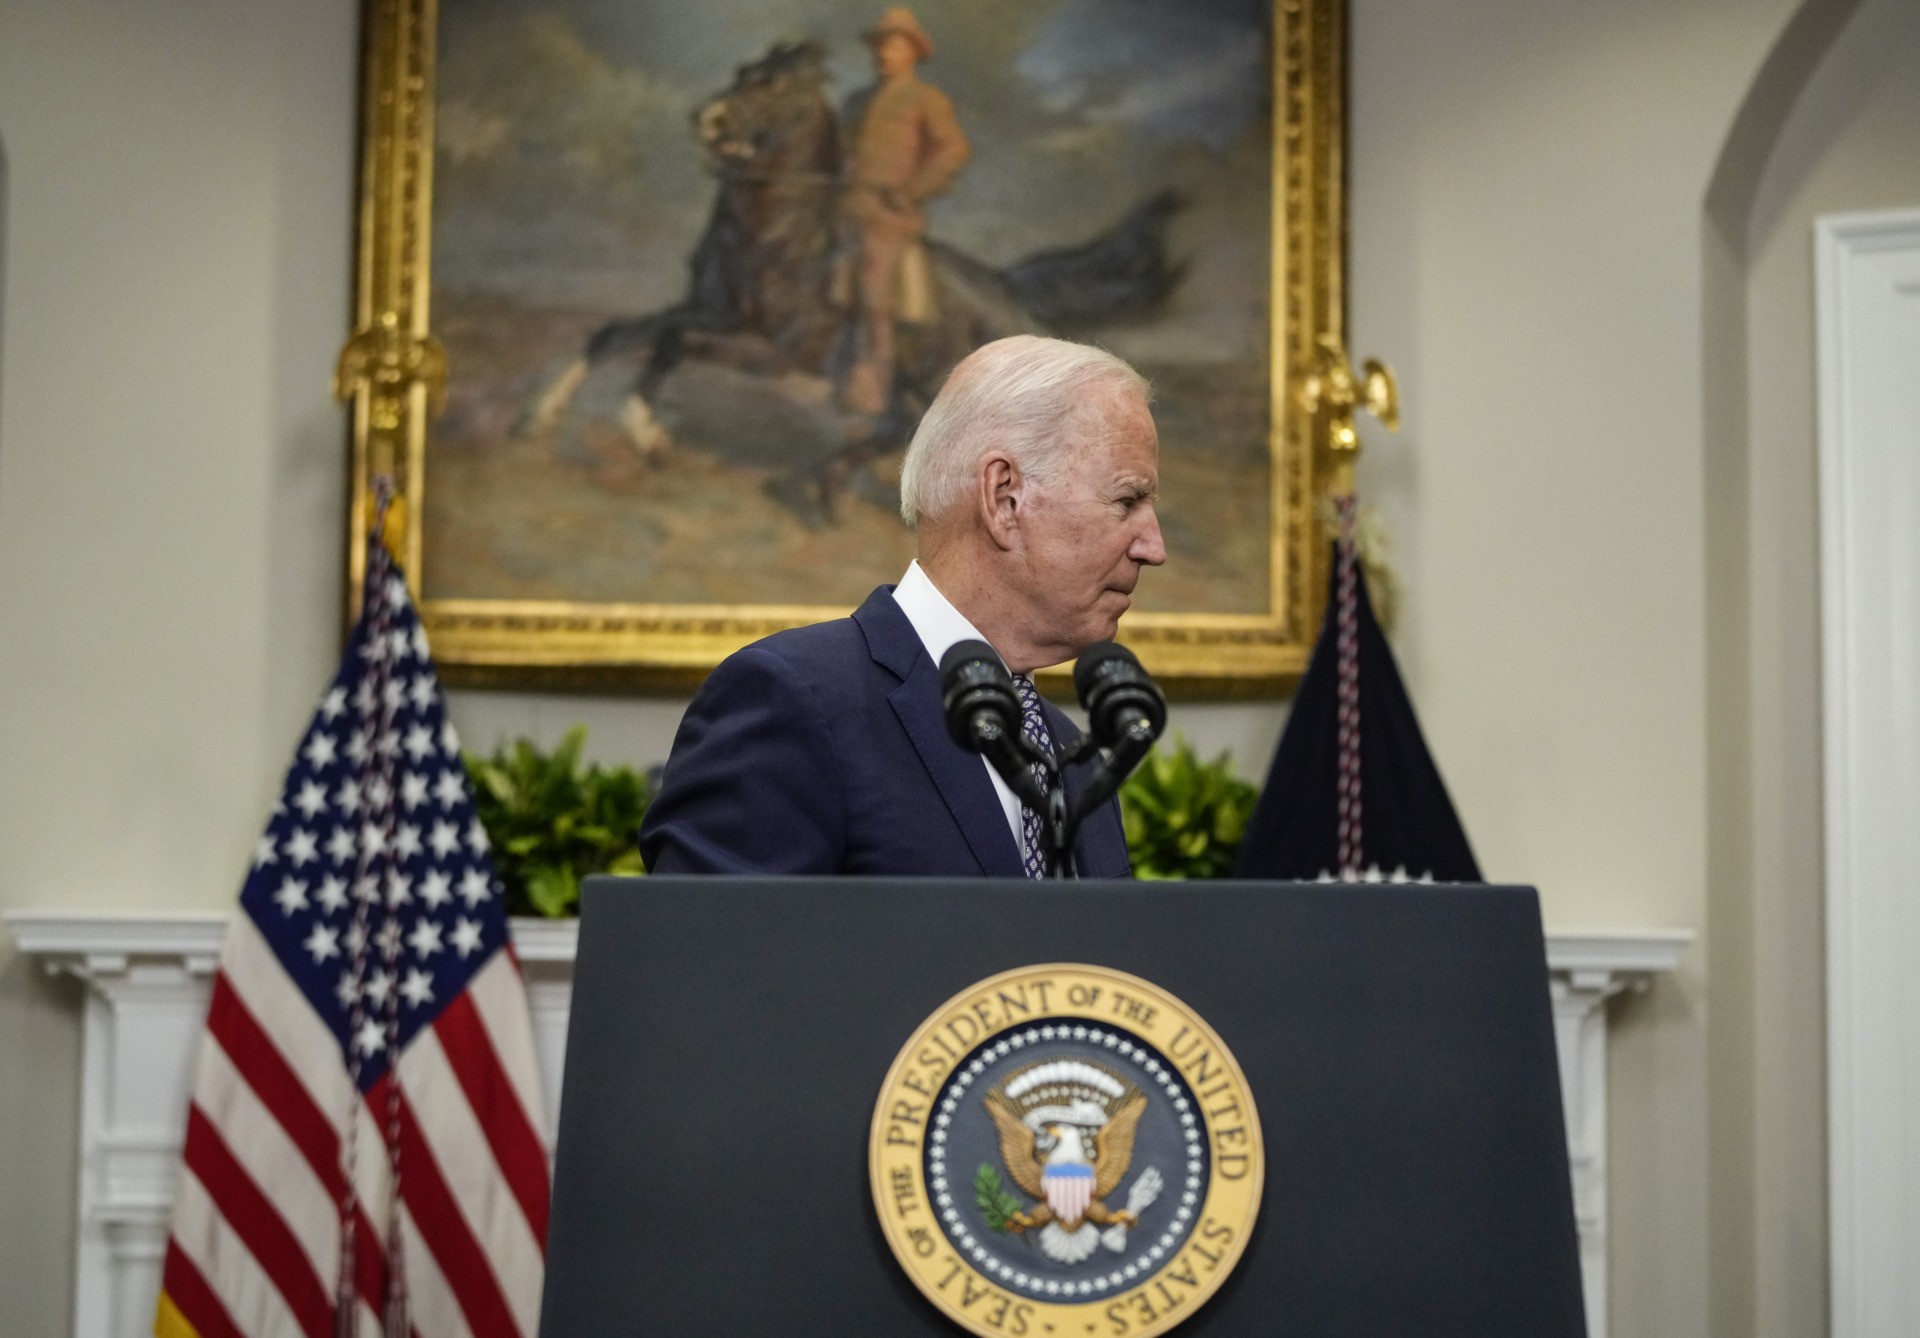 WASHINGTON, DC - AUGUST 24: U.S. President Joe Biden departs after speaking about the situation in Afghanistan in the Roosevelt Room of the White House on August 24, 2021 in Washington, DC. Biden discussed the ongoing evacuations in Afghanistan, saying the U.S. has evacuated over 70,000 people from the country. (Photo by Drew Angerer/Getty Images)